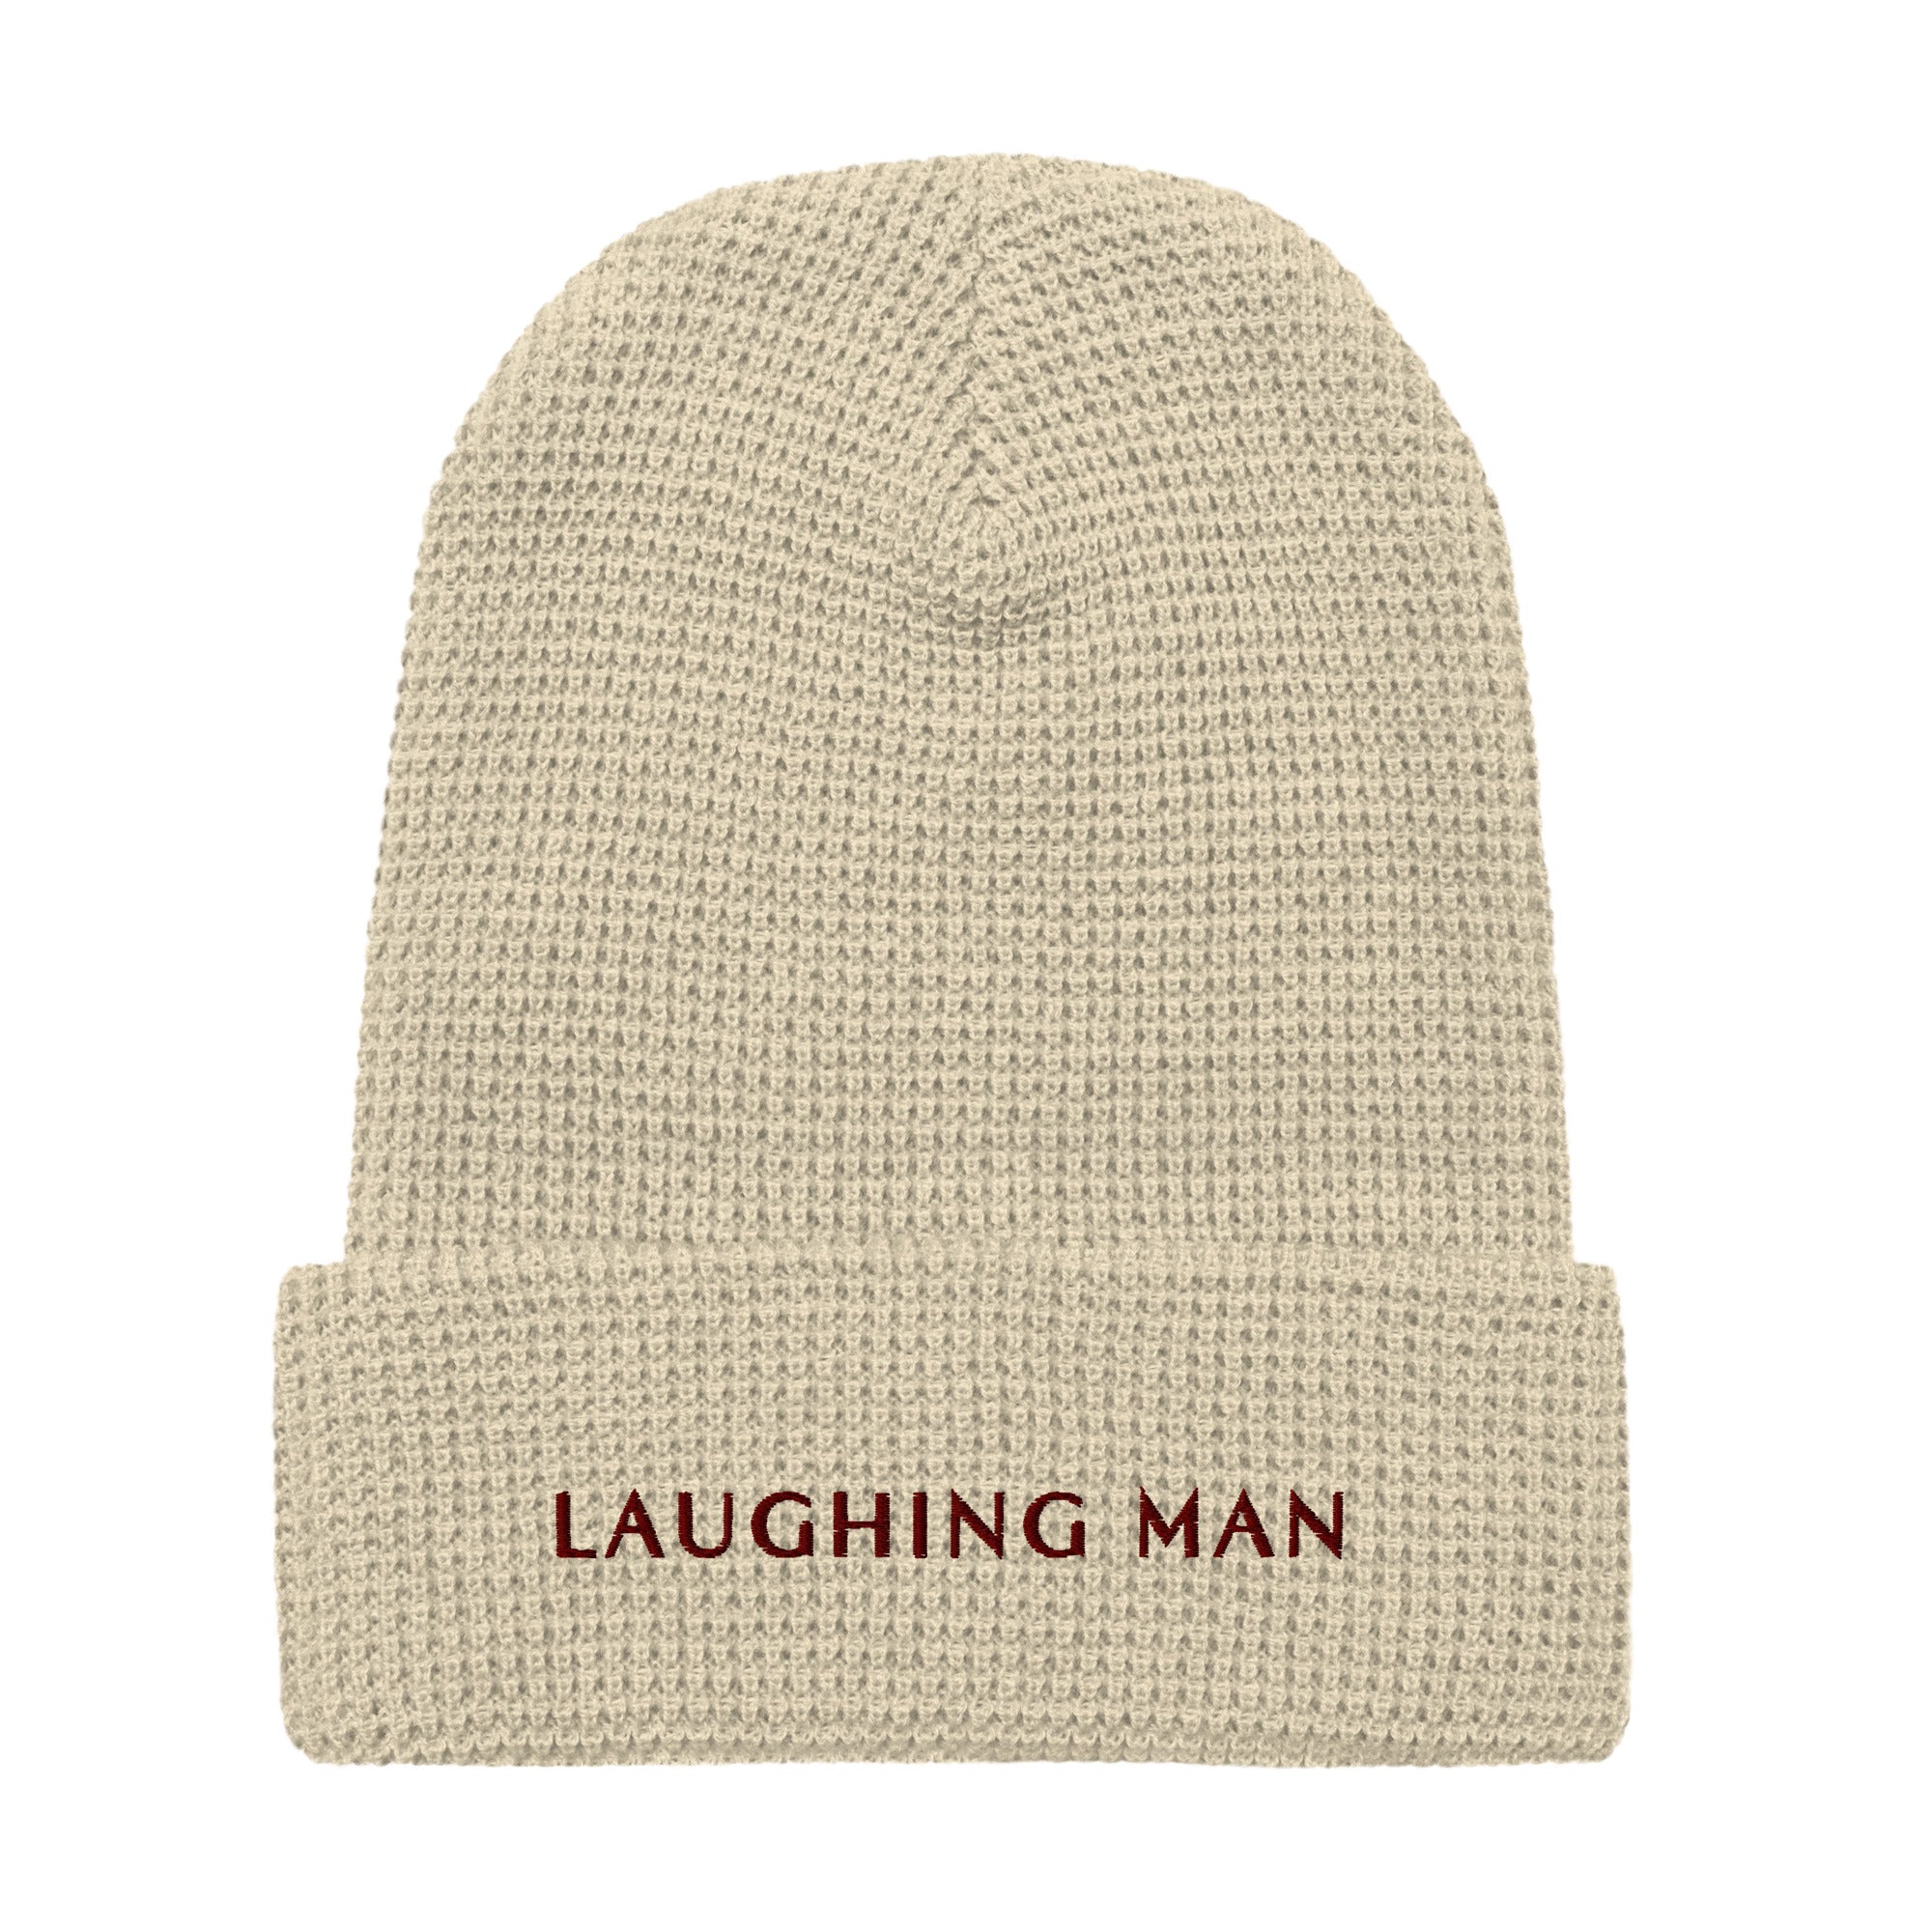 Laughing Man Collections - Laughing Man Coffee